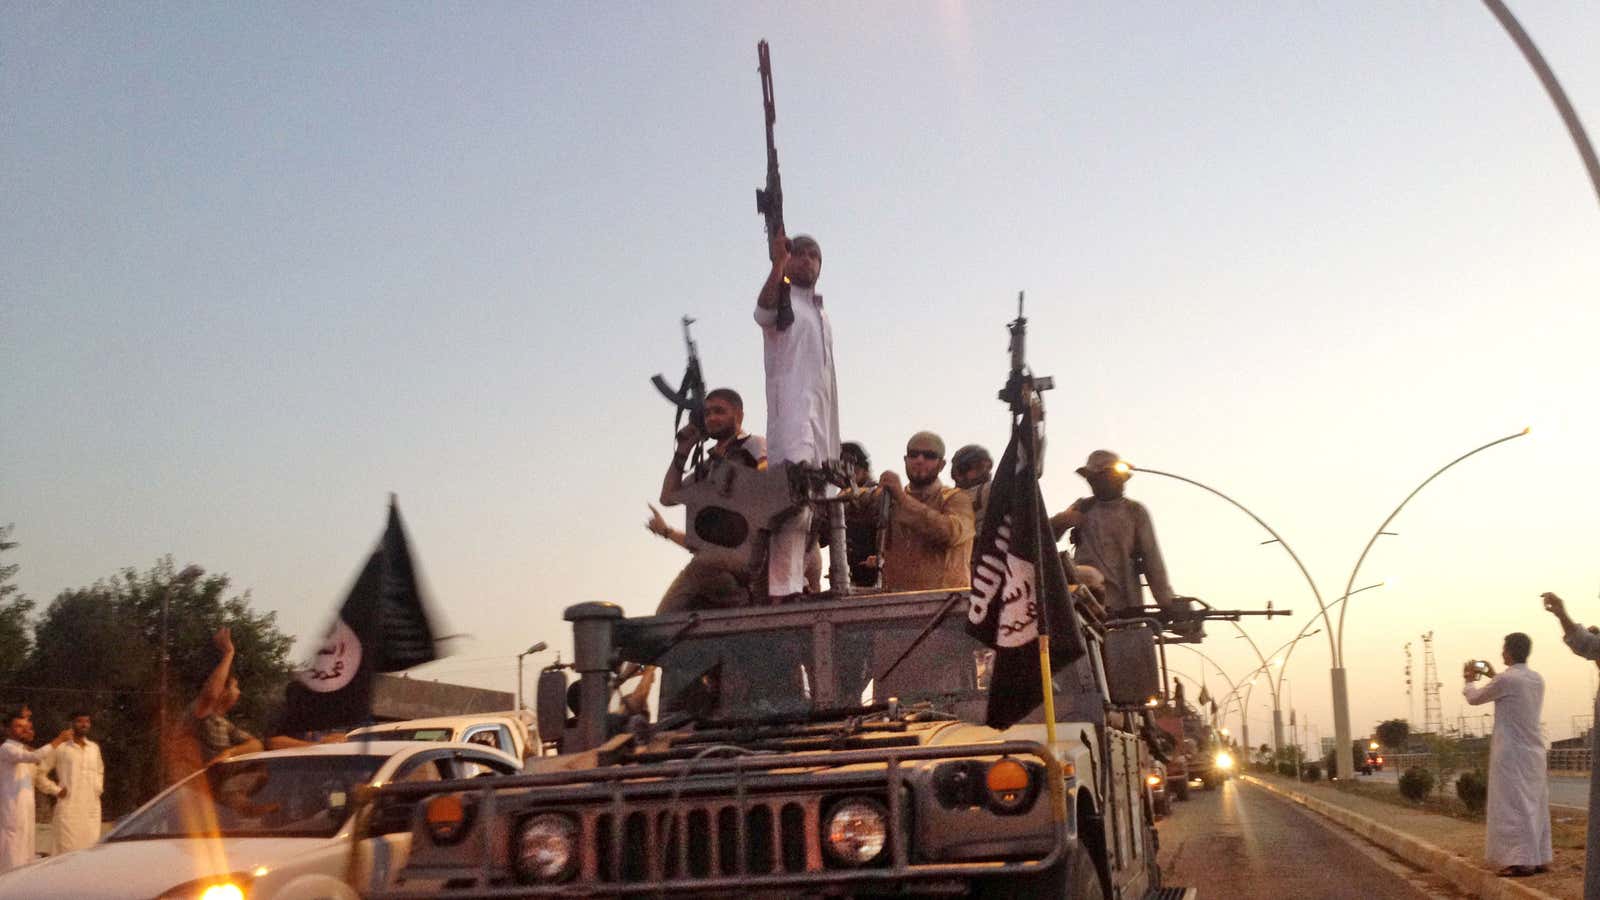 Most ISIL supporters in the US stick to Twitter jihad.